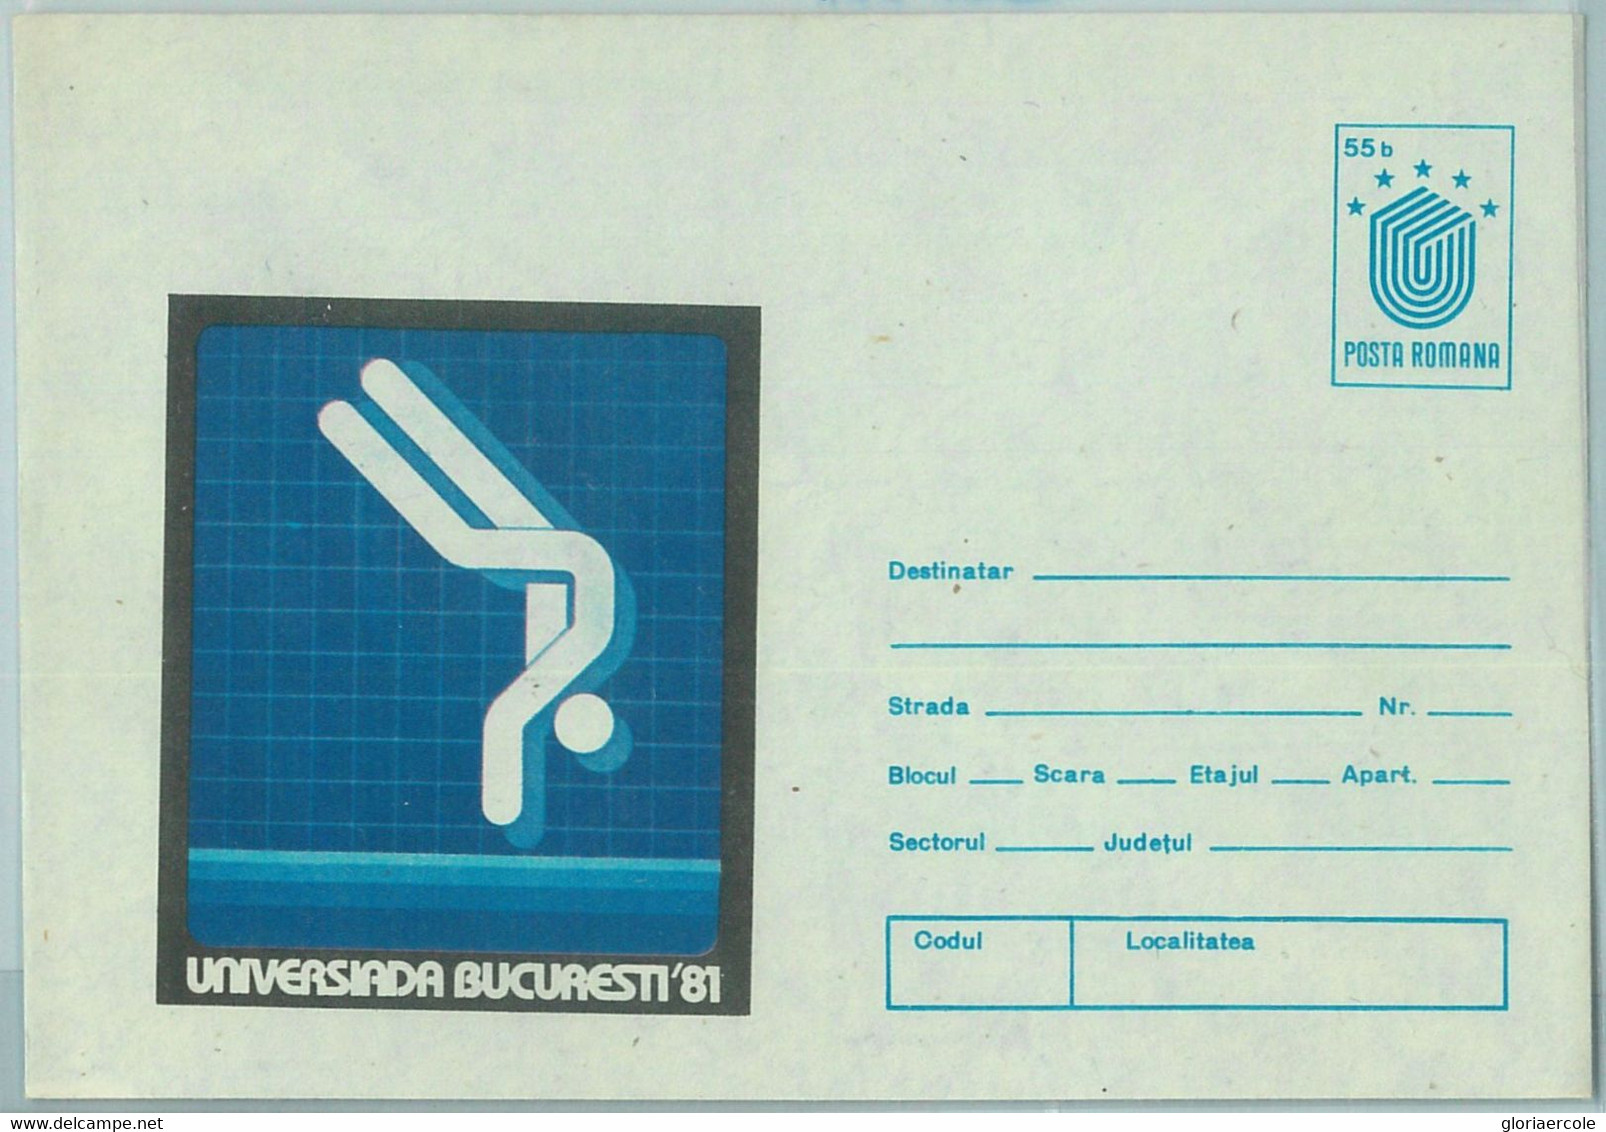 67803 - ROMANIA  - POSTAL HISTORY - STATIONERY COVER - 1981, Universiade Games Bucarest '81, Diving - Duiken